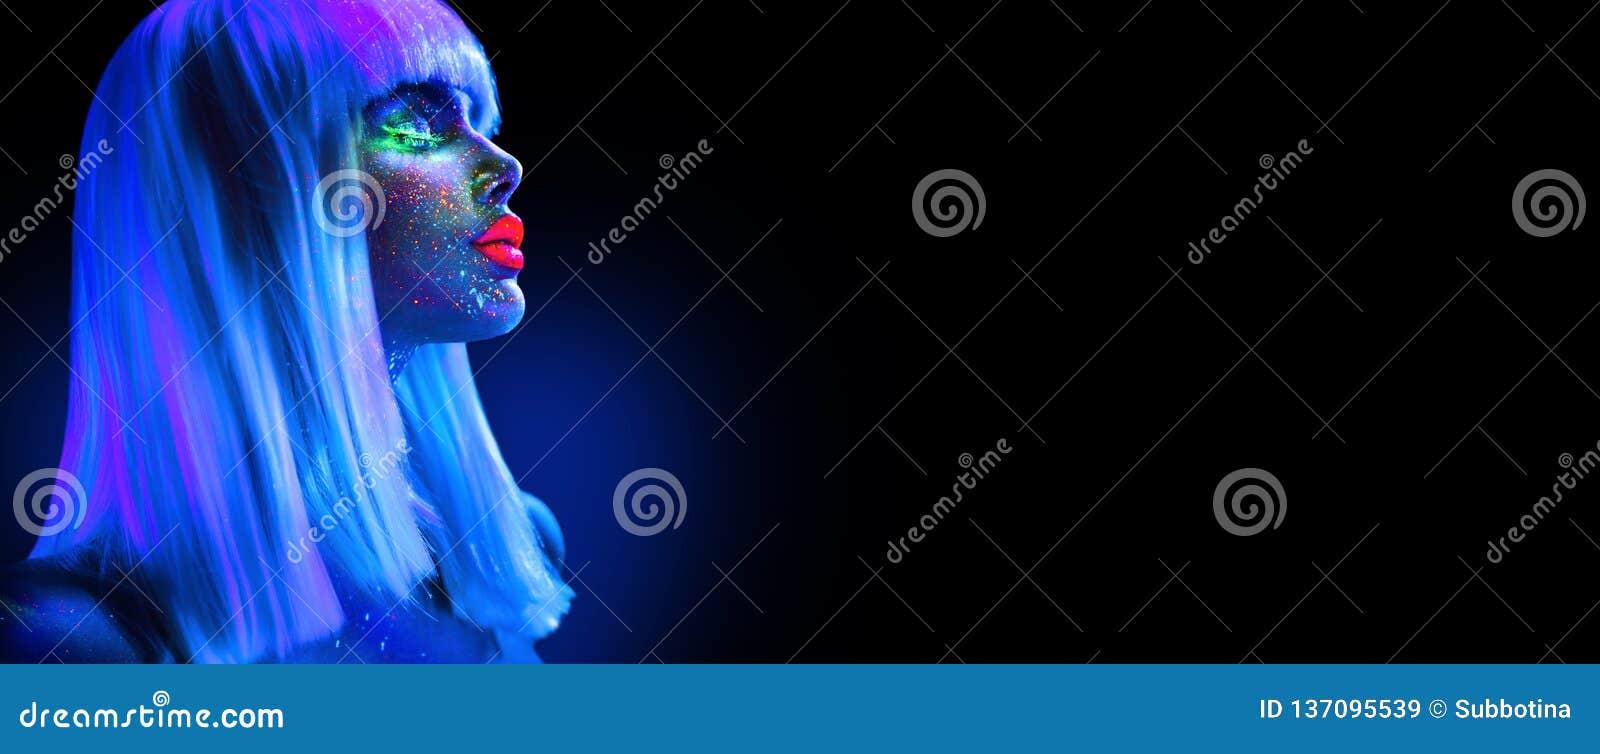 fashion model woman in neon light. beautiful model girl with colorful bright fluorescent makeup  on black. ultraviolet